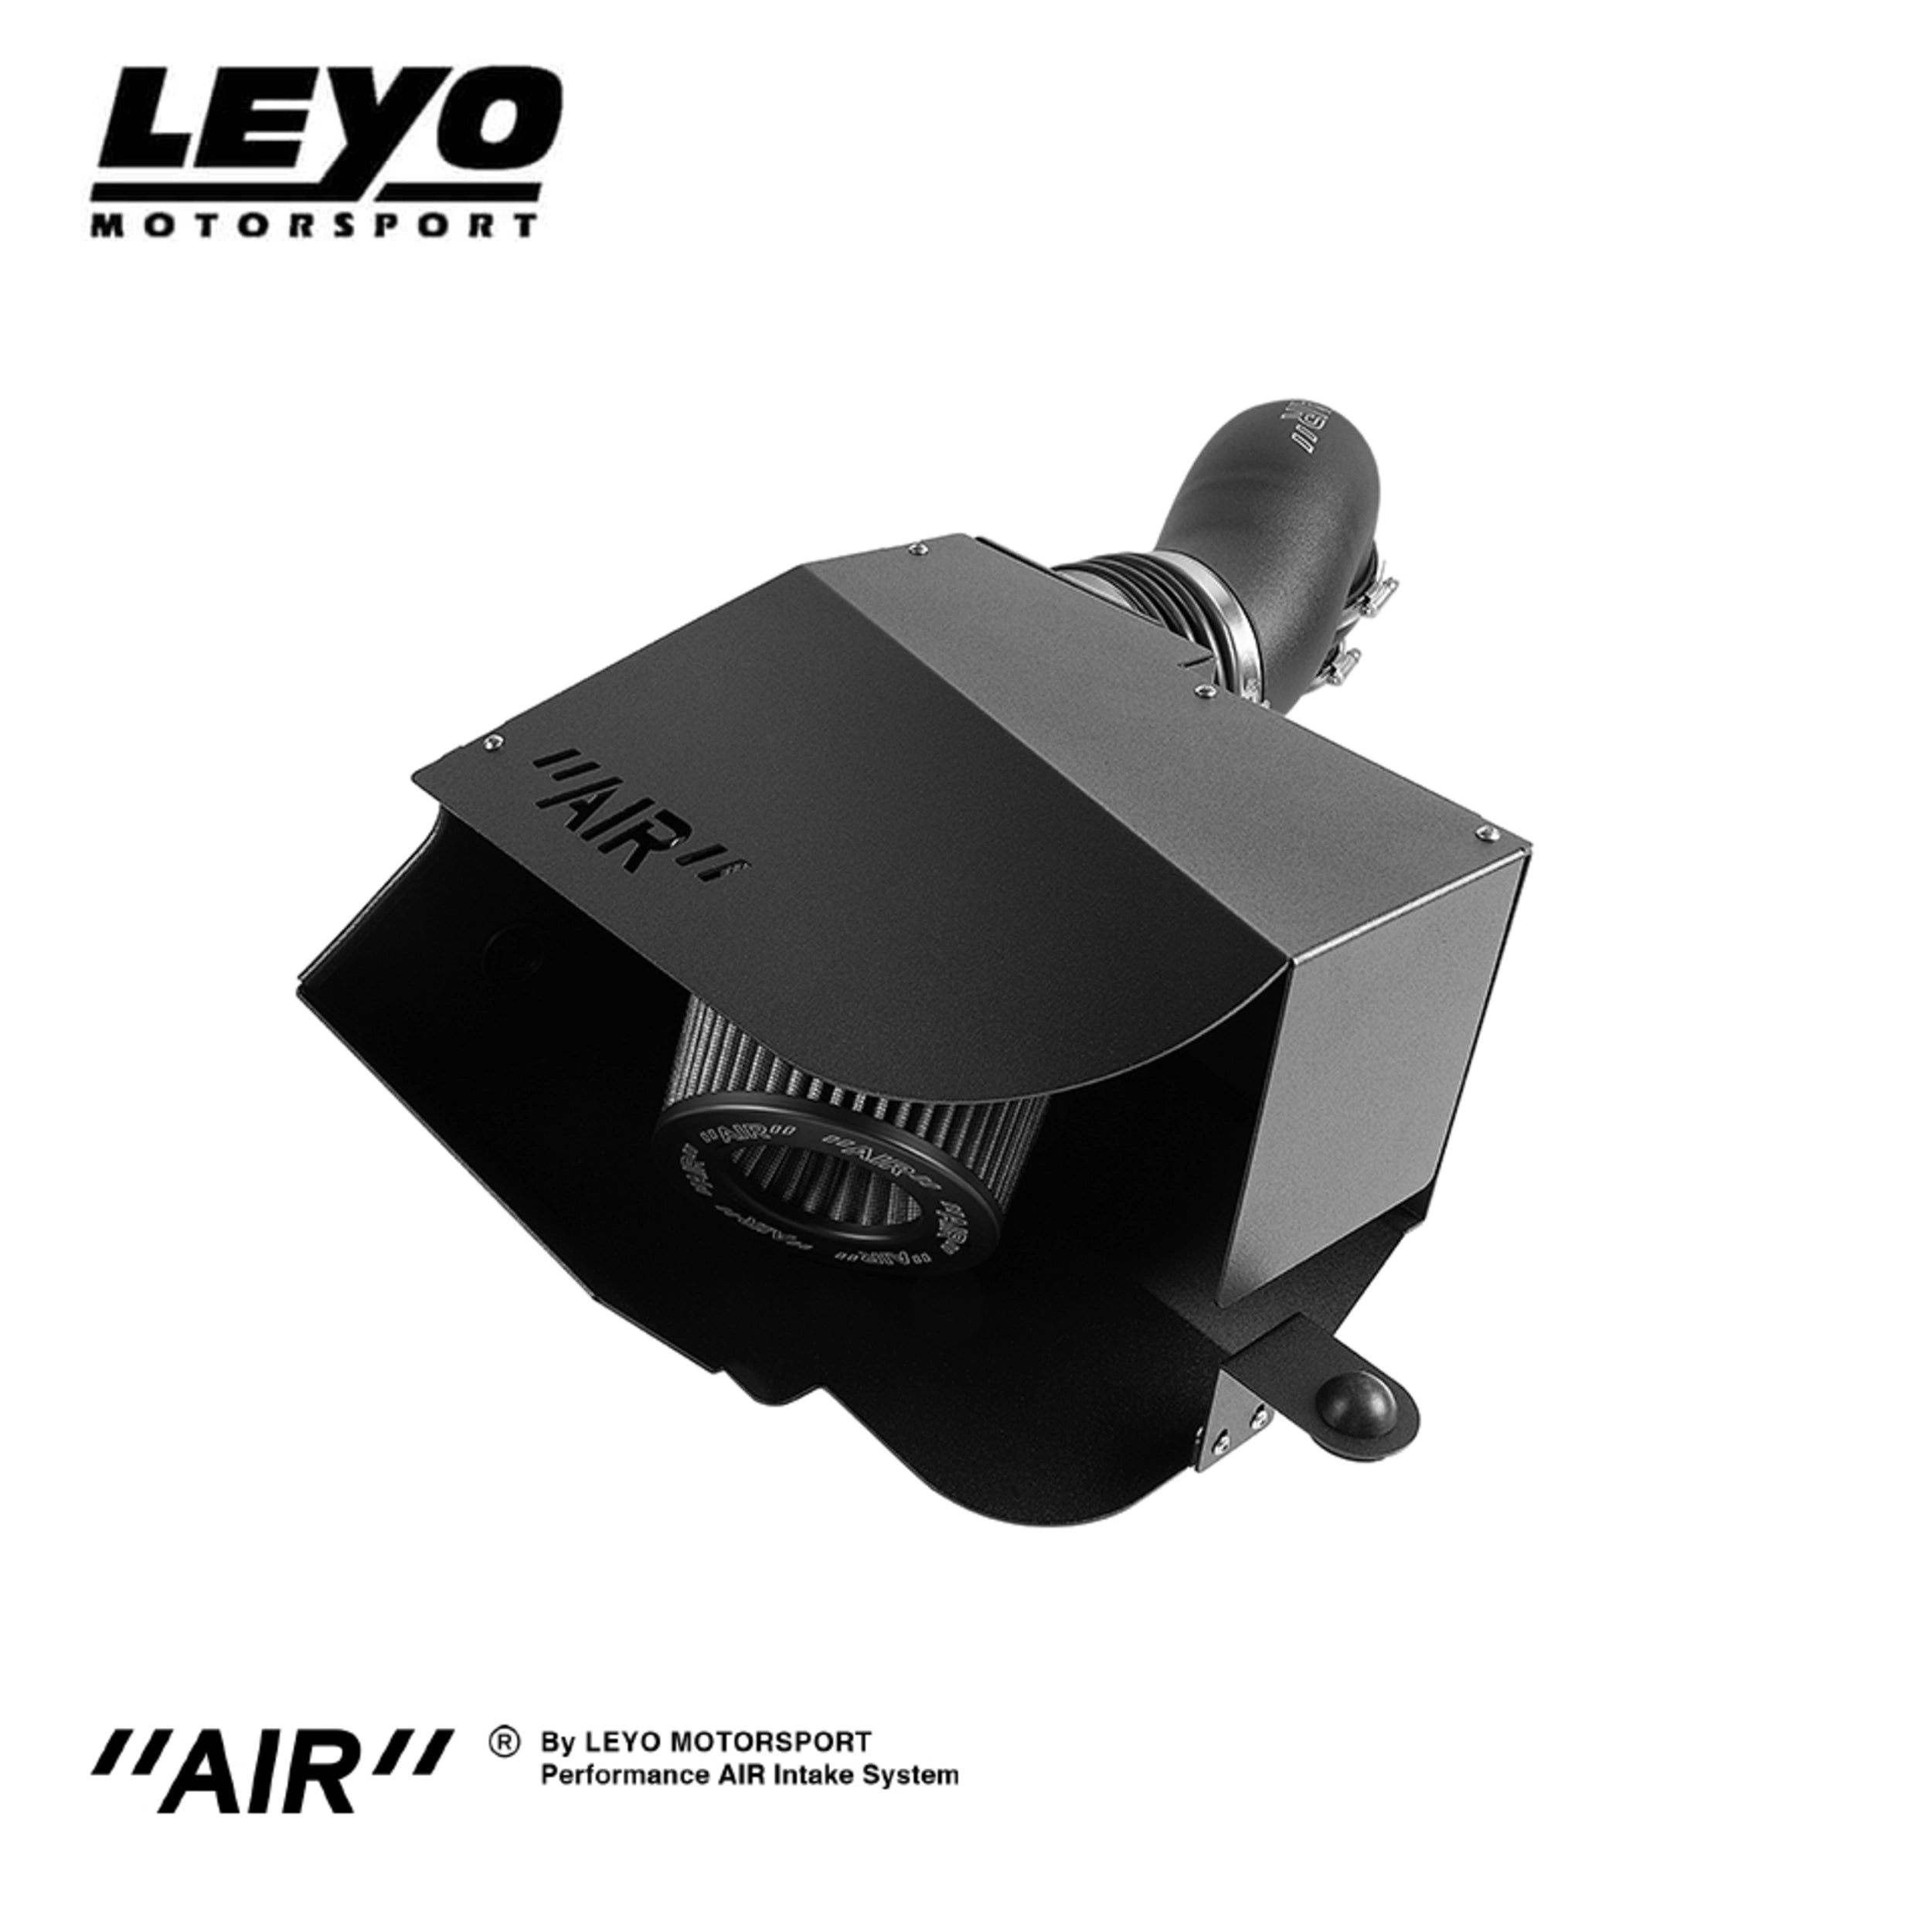 LEYO AIR Cold Air Intake System V2 for Audi A3, S3 8V/TT 8S/VW Golf GTI, R Mk7-7.5 (1.8T/2.0T)